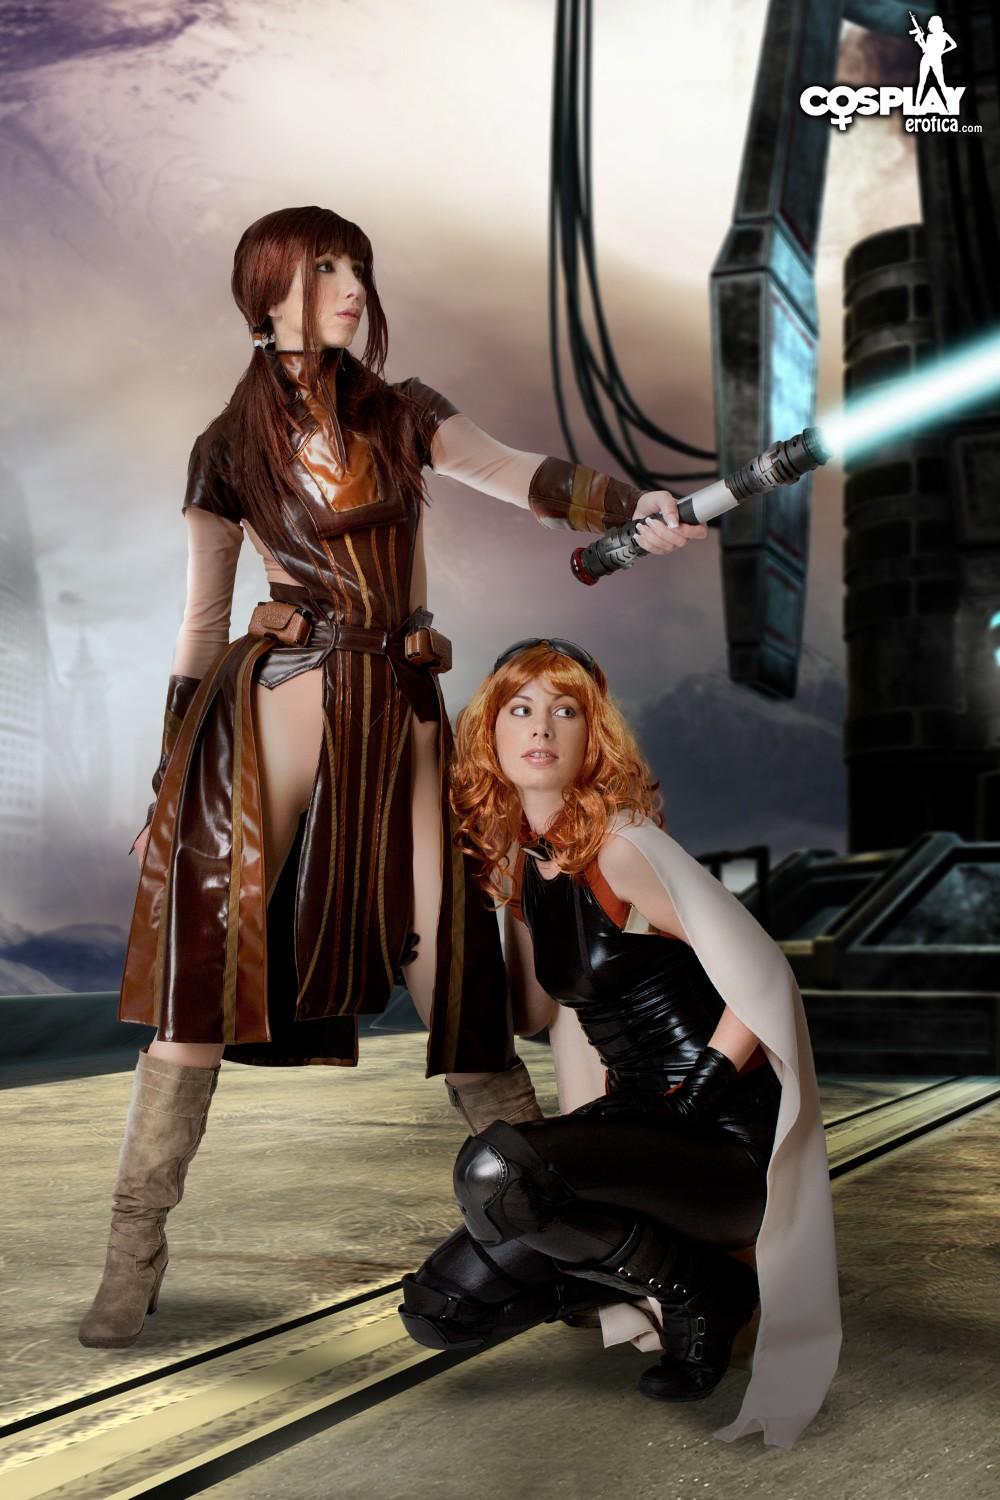 Cosplay hotties Marylin and Angela are sexy Jedi Knights #53179493